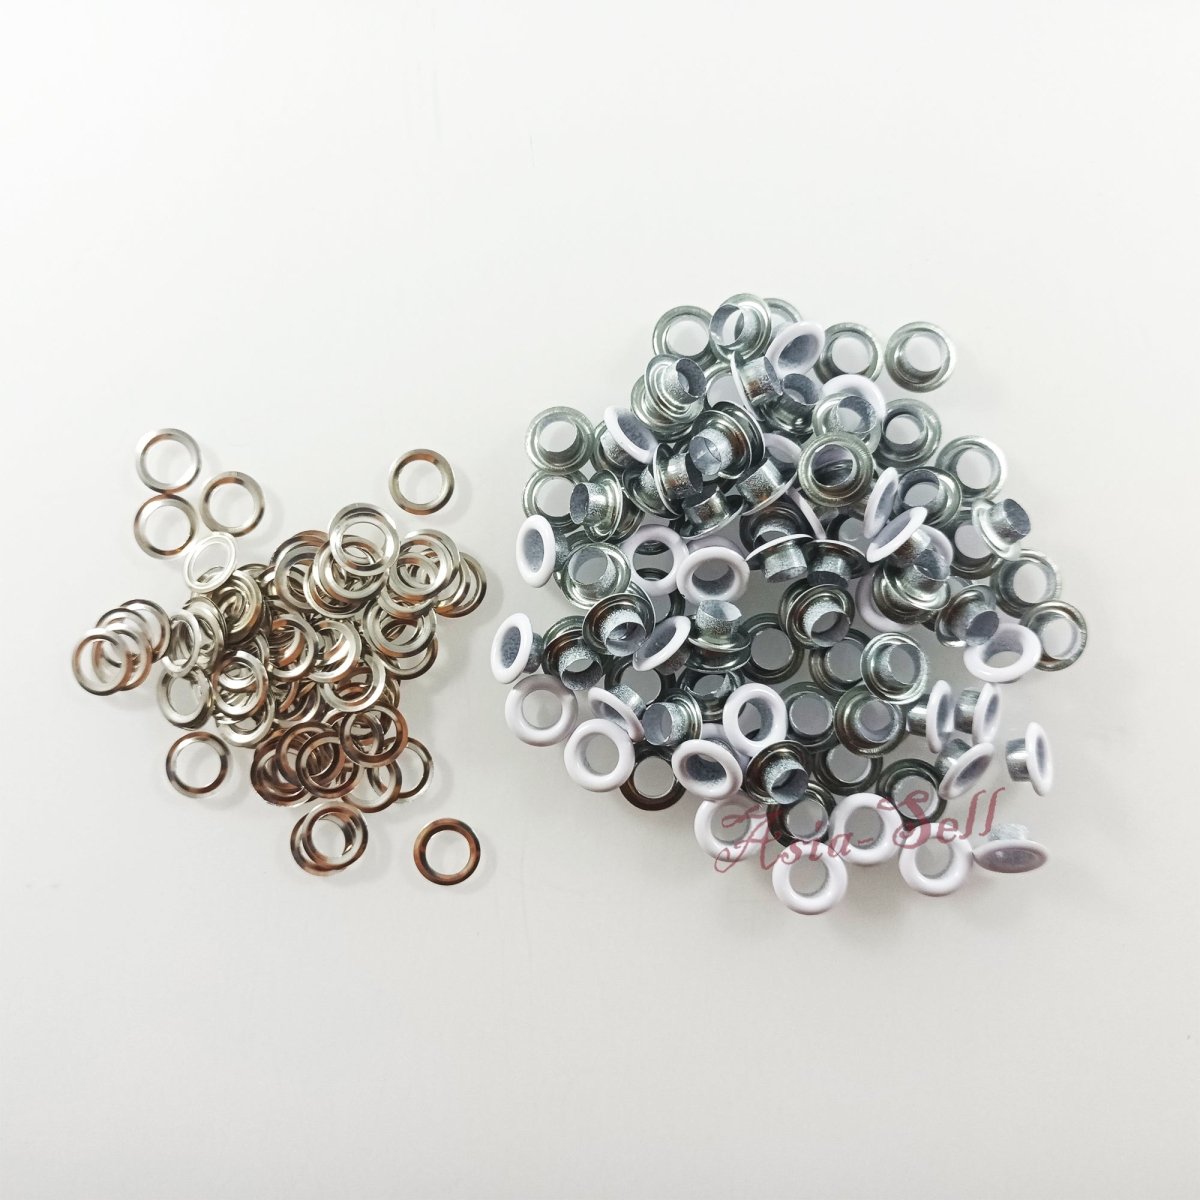 4mm 5mm Eyelets Rivets Metal Buttonholes Buckle Clothing Buttons Mixed Colours Painted Black White Craft - 20PCS 5mm White - - Asia Sell